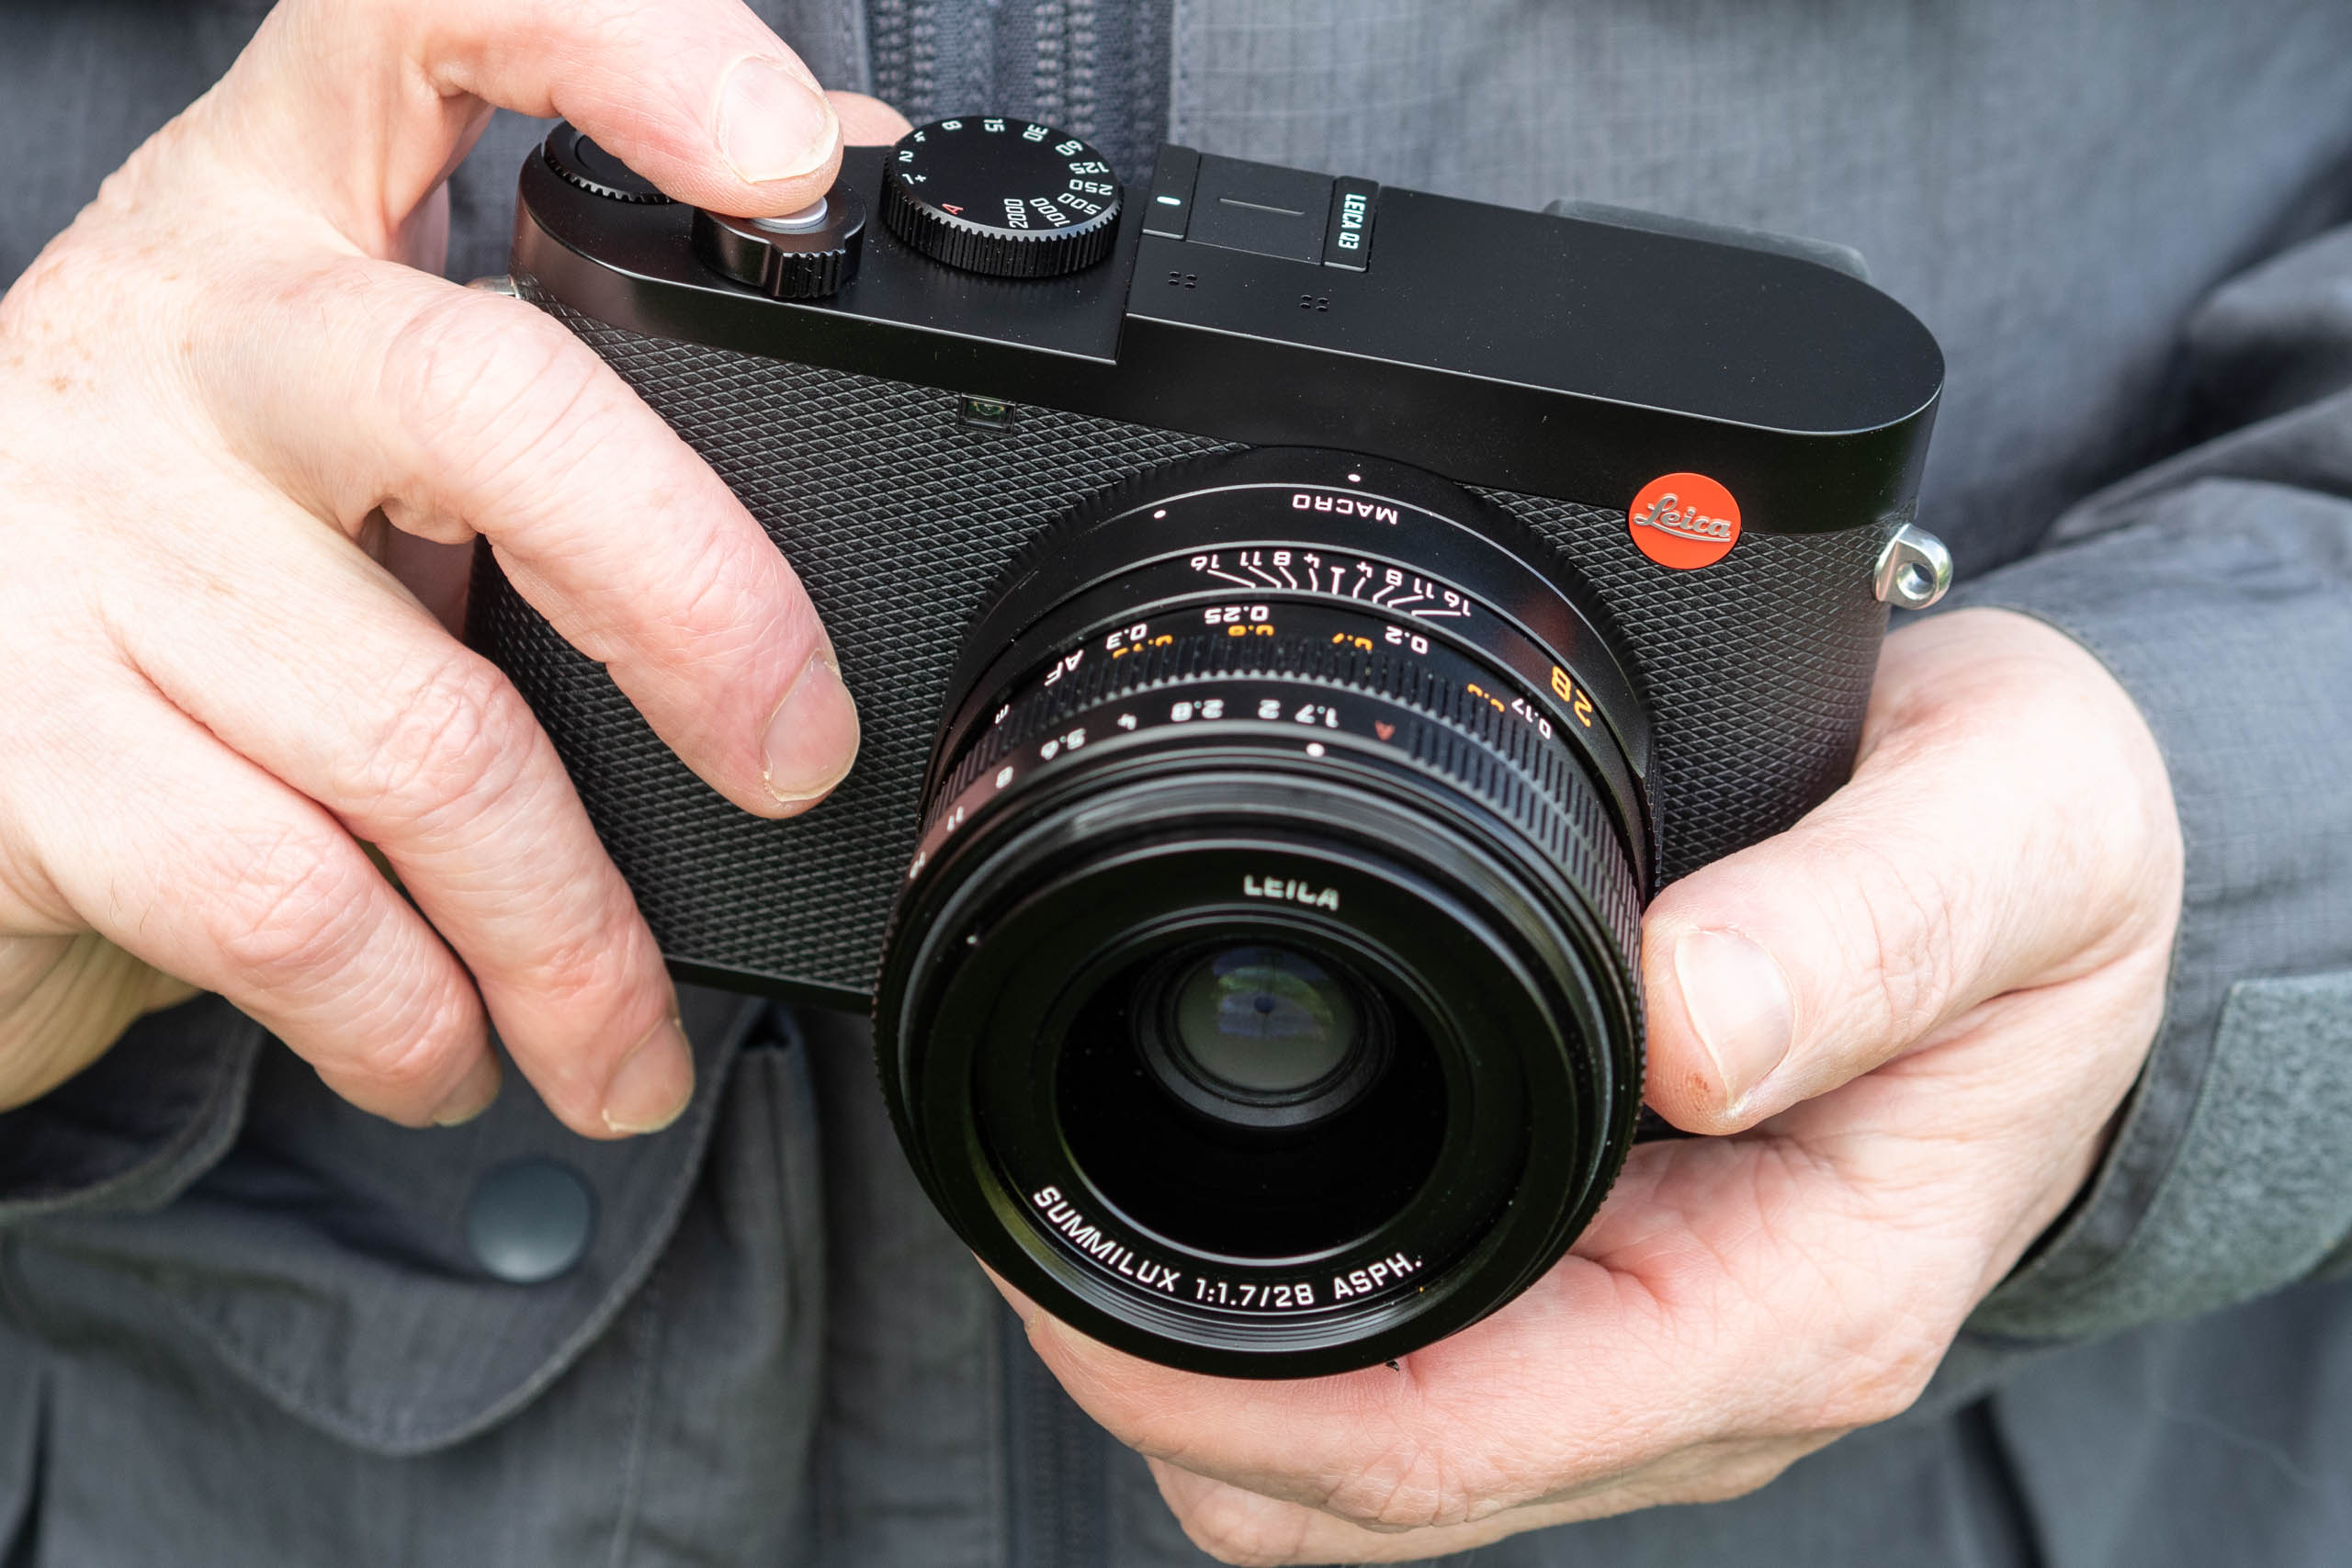 Leica Q3 60.3MP Compact Camera - Black for sale online